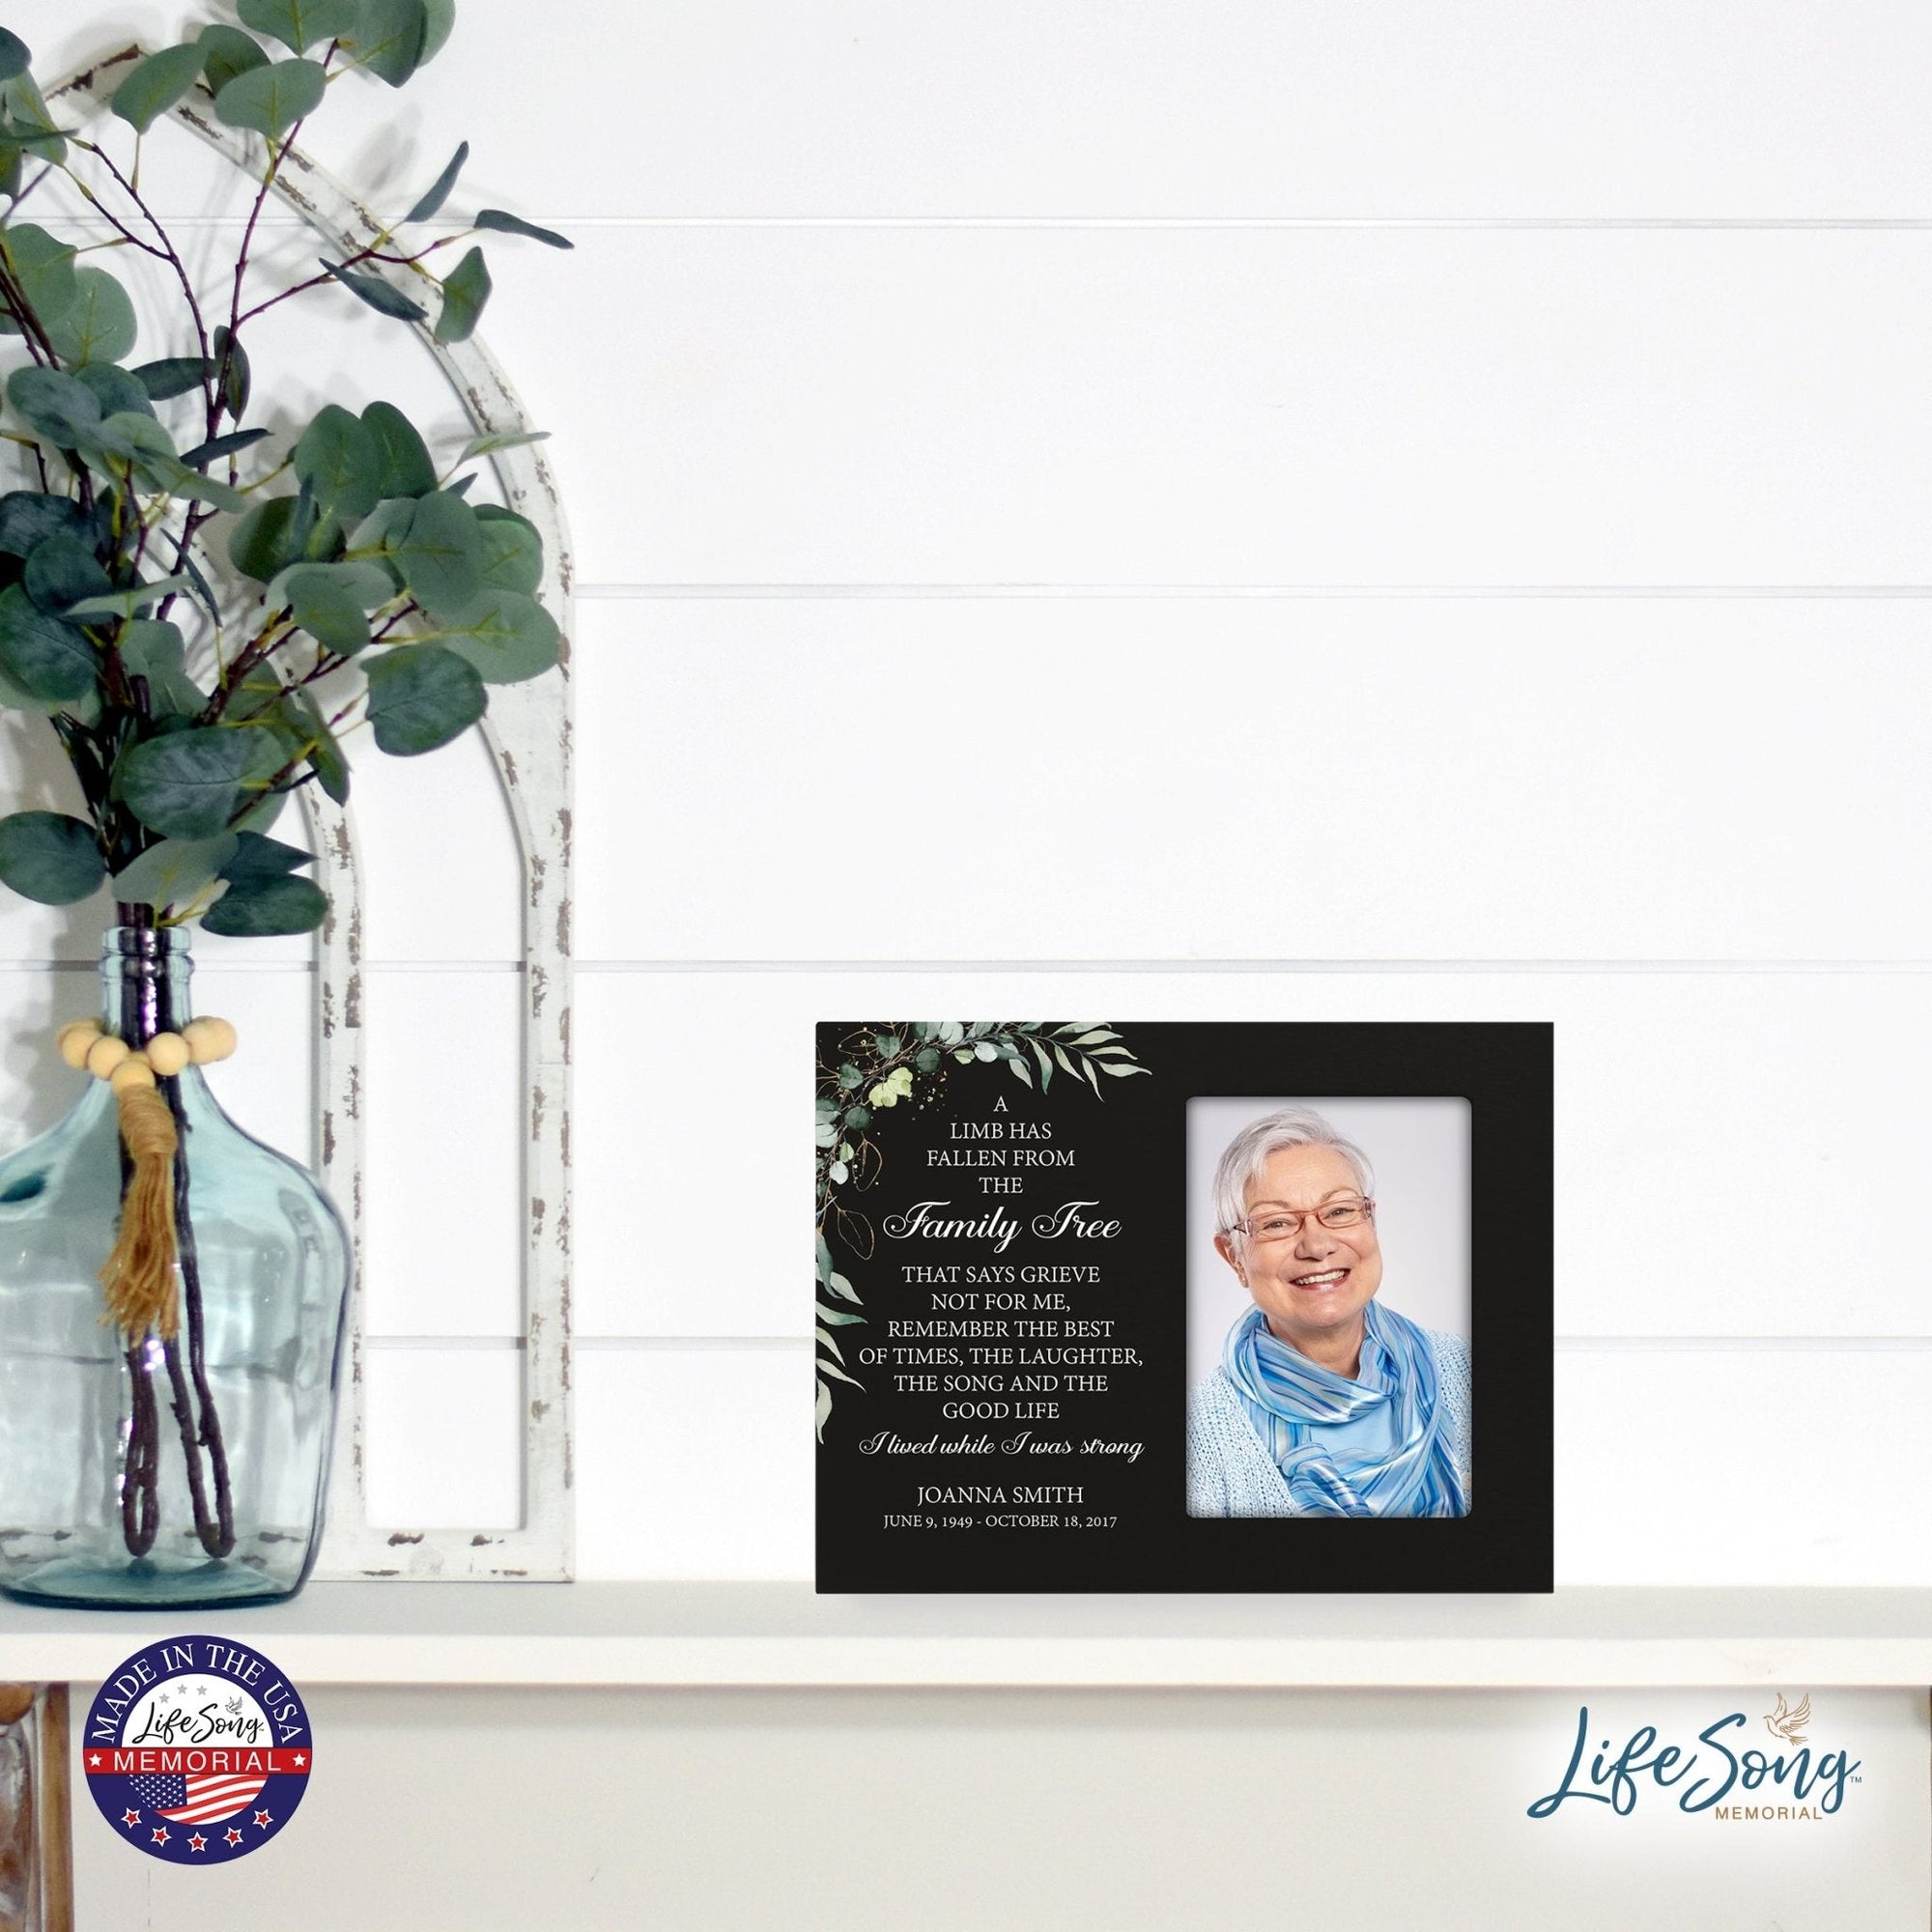 Personalized Horizontal 8x10 Wooden Memorial Picture Frame Holds 4x6 Photo - A Limb Has Fallen (Black) - LifeSong Milestones